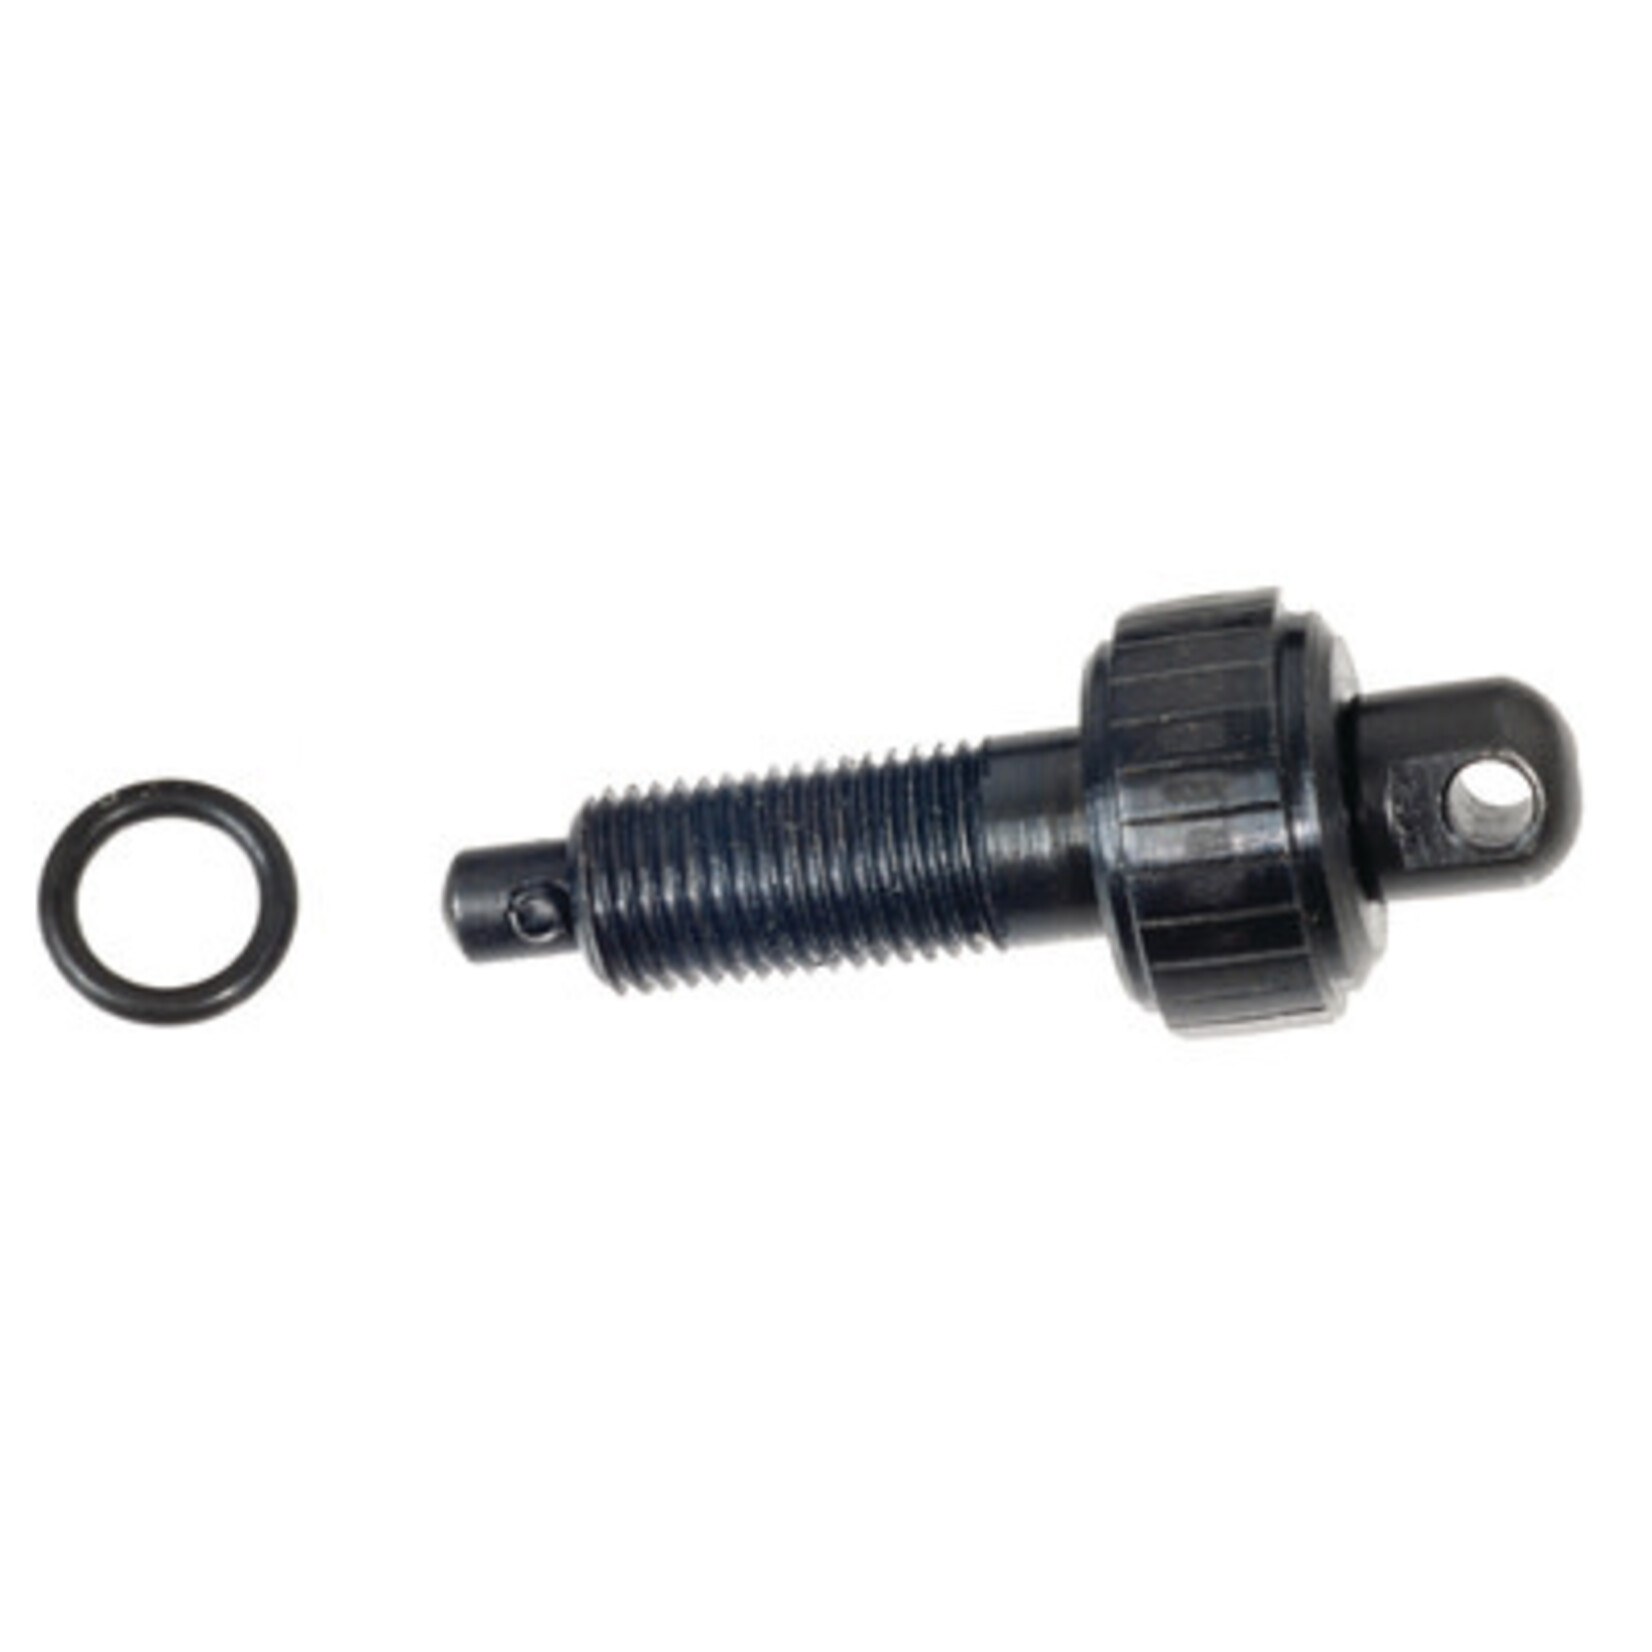 OUTDOOR CONNECTION Outdoor Connection Magazine Takedown Bolt MOSSBERG  500 .410 w/ Retaining swivel Base